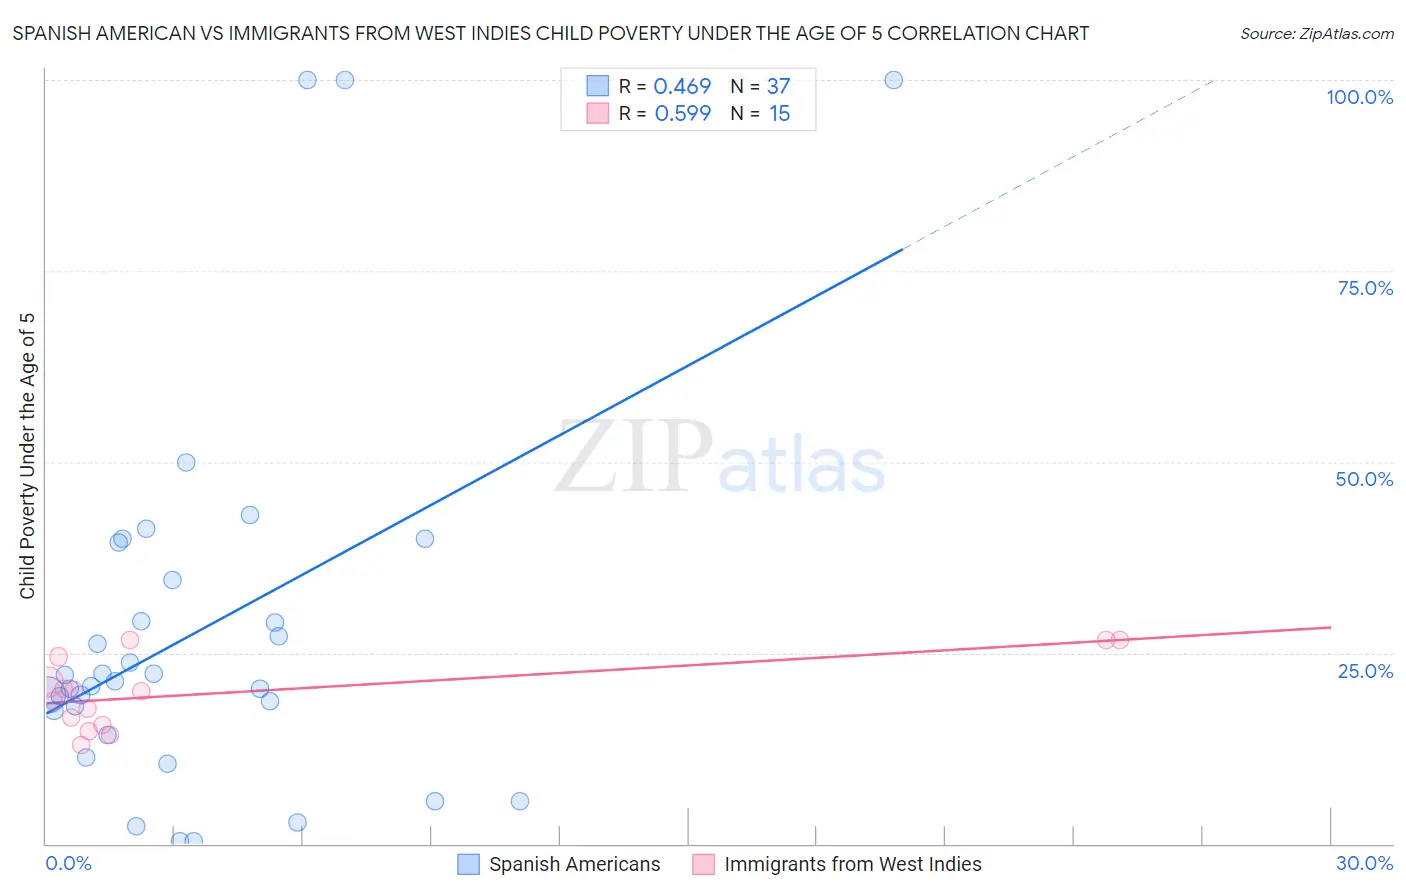 Spanish American vs Immigrants from West Indies Child Poverty Under the Age of 5